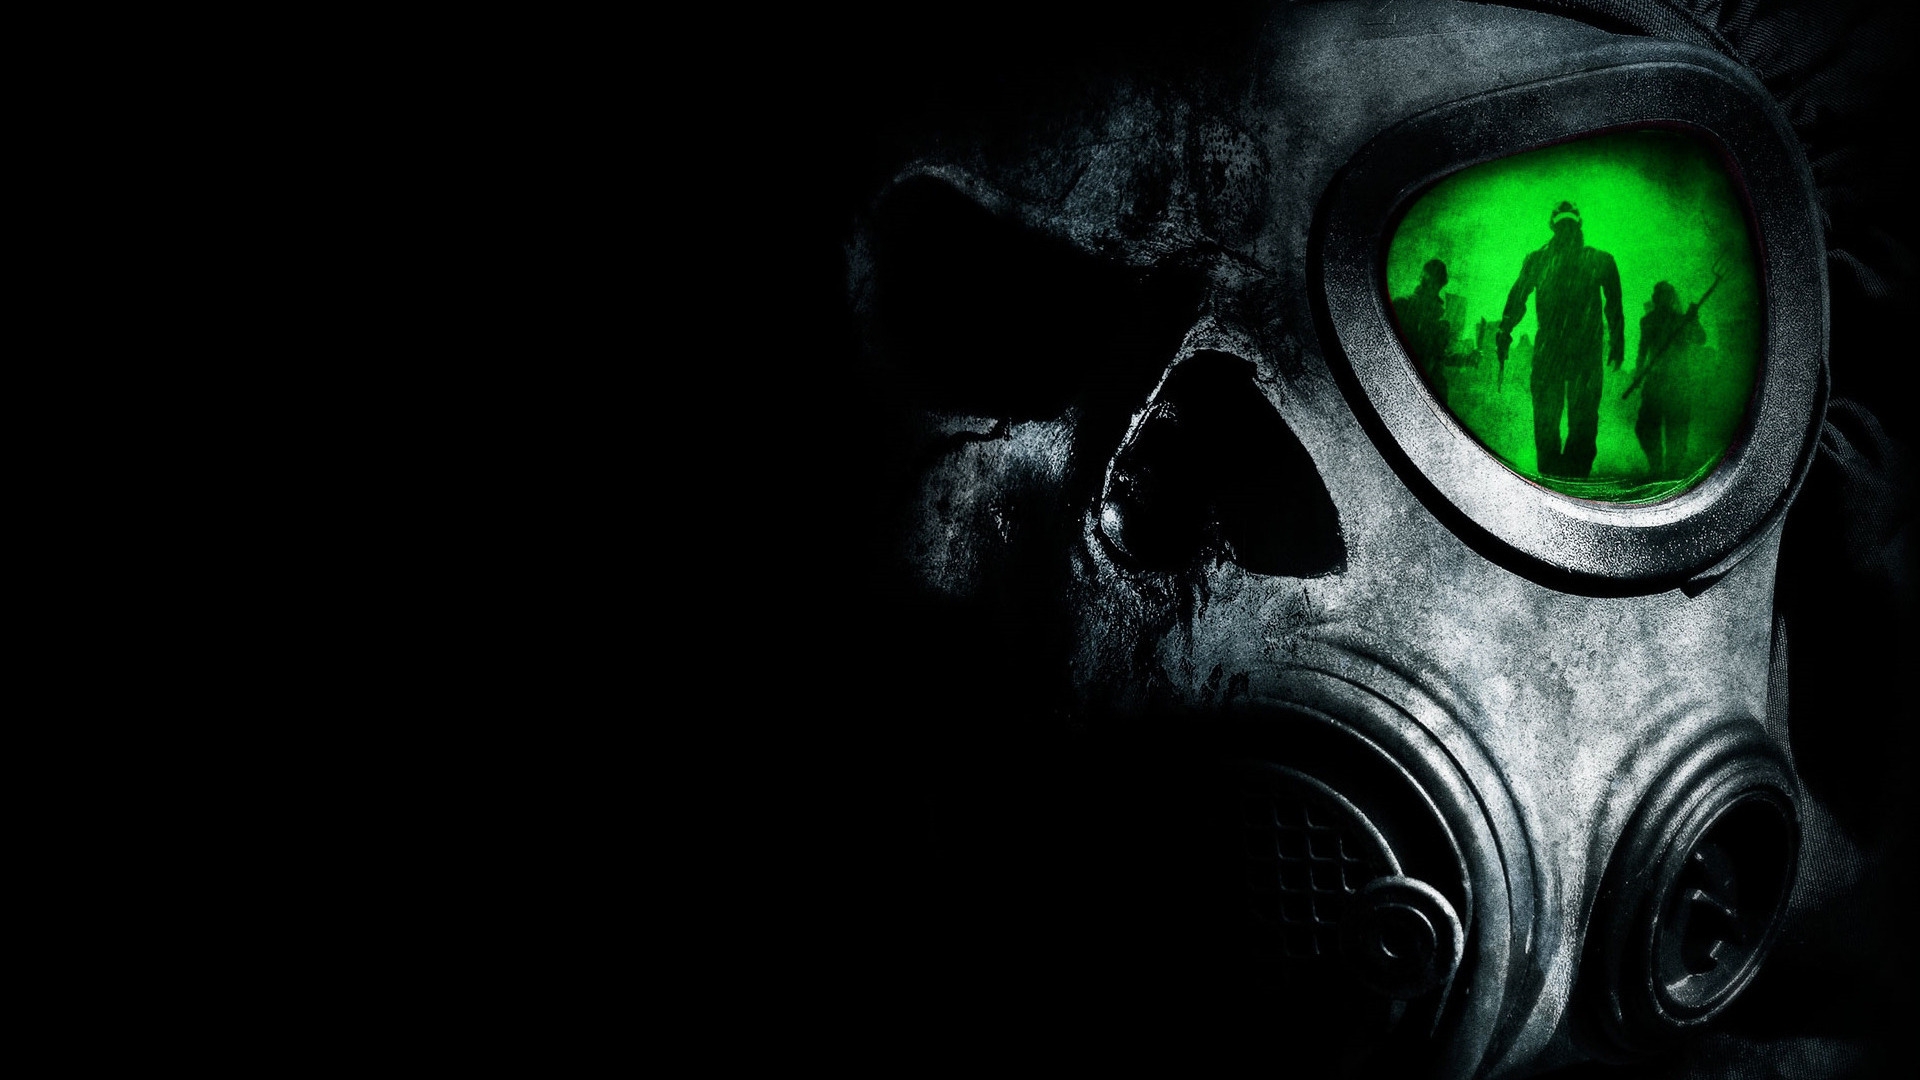 Gas Mask for 1920 x 1080 HDTV 1080p resolution